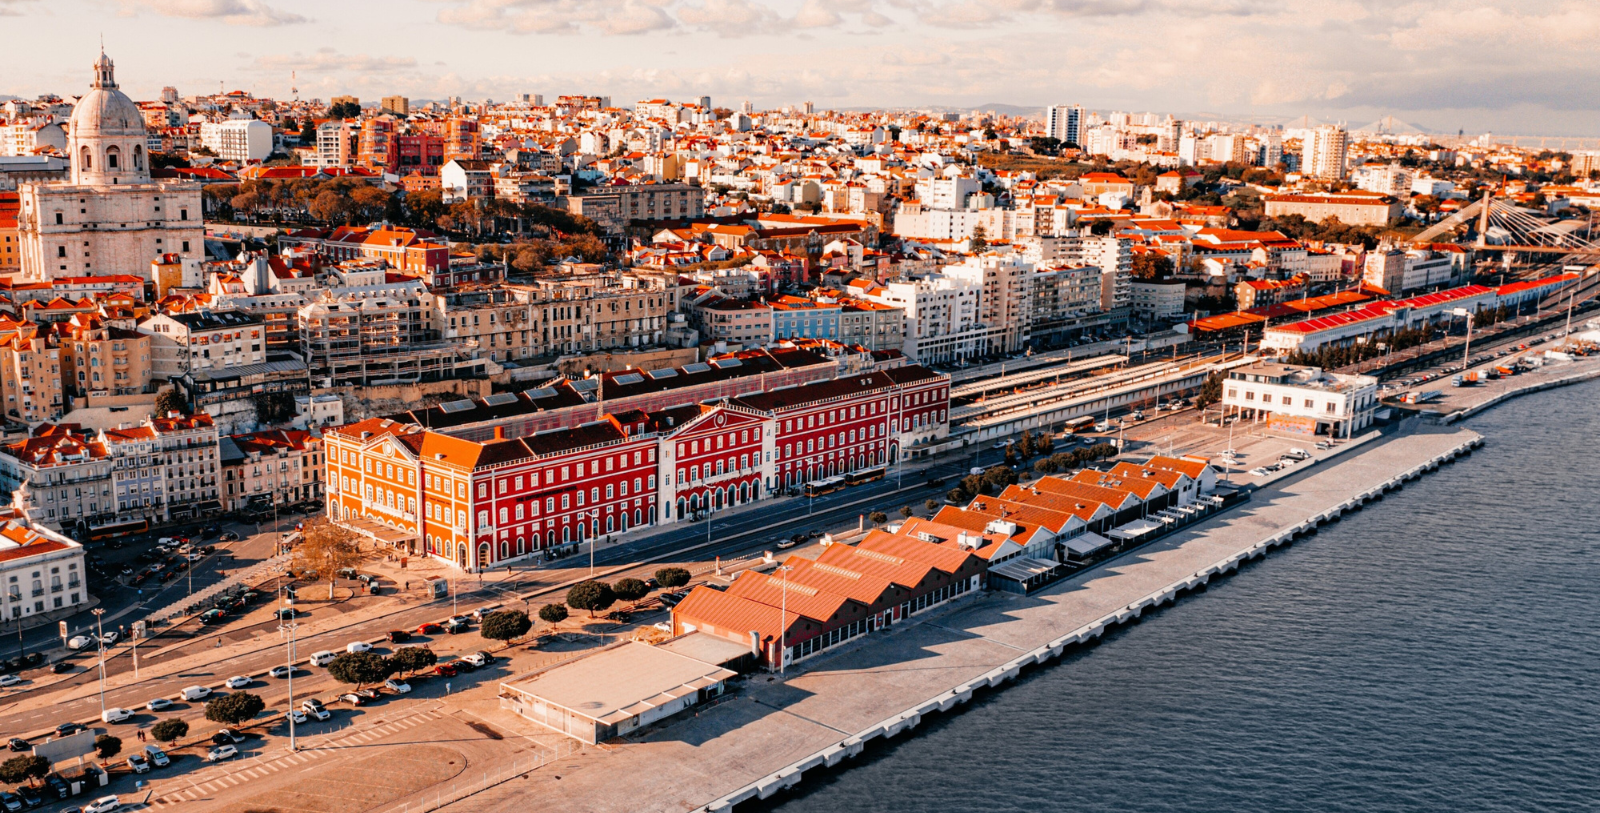 Delve into the rich cultural heritage, stunning architecture, and storied history of Lisbon, Europe’s second-oldest capital city and a crossroads of European and Moorish cultures.